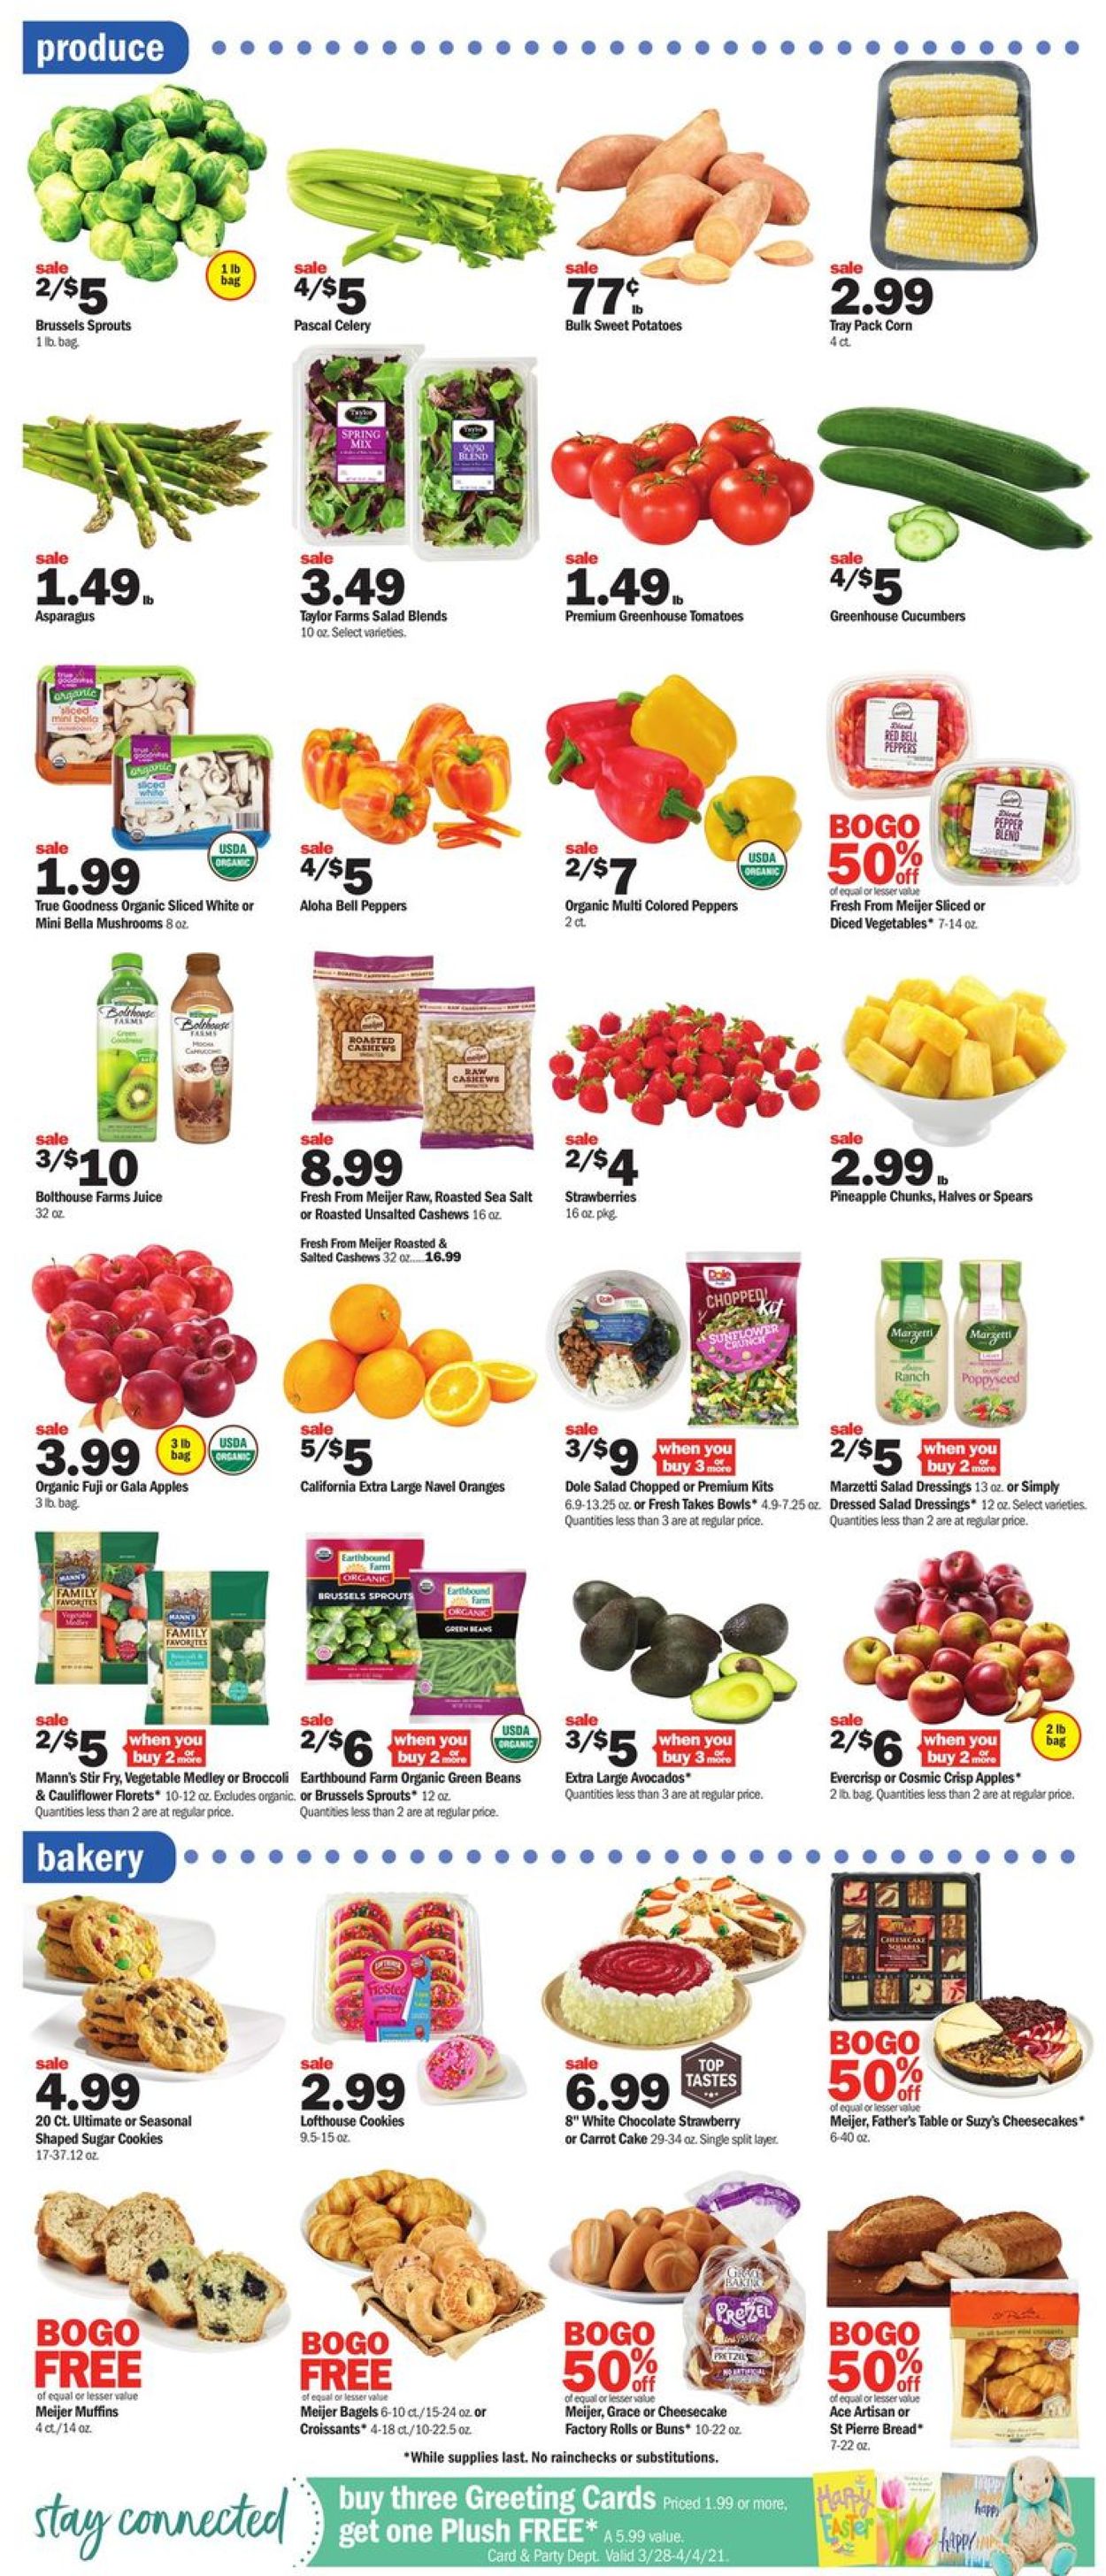 Meijer - Easter 2021 ad Weekly Ad Circular - valid 03/28-04/03/2021 (Page 3)